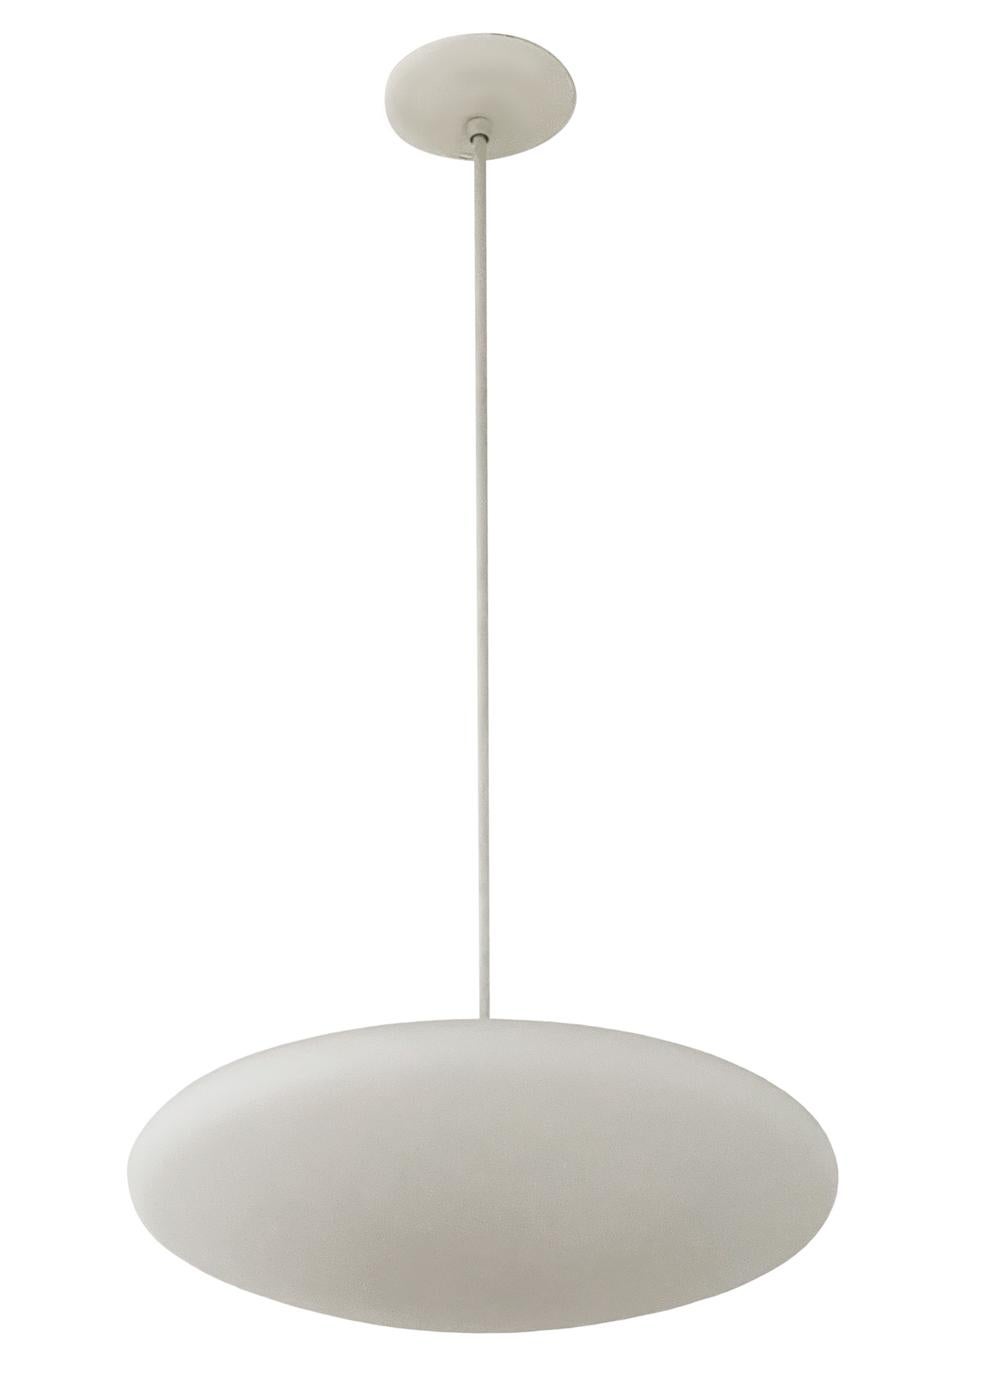 A simple Classic modern pendant lamp circa 1960s. These hang 38 inches from the ceiling, length is not adjustable. Sold as a pair.